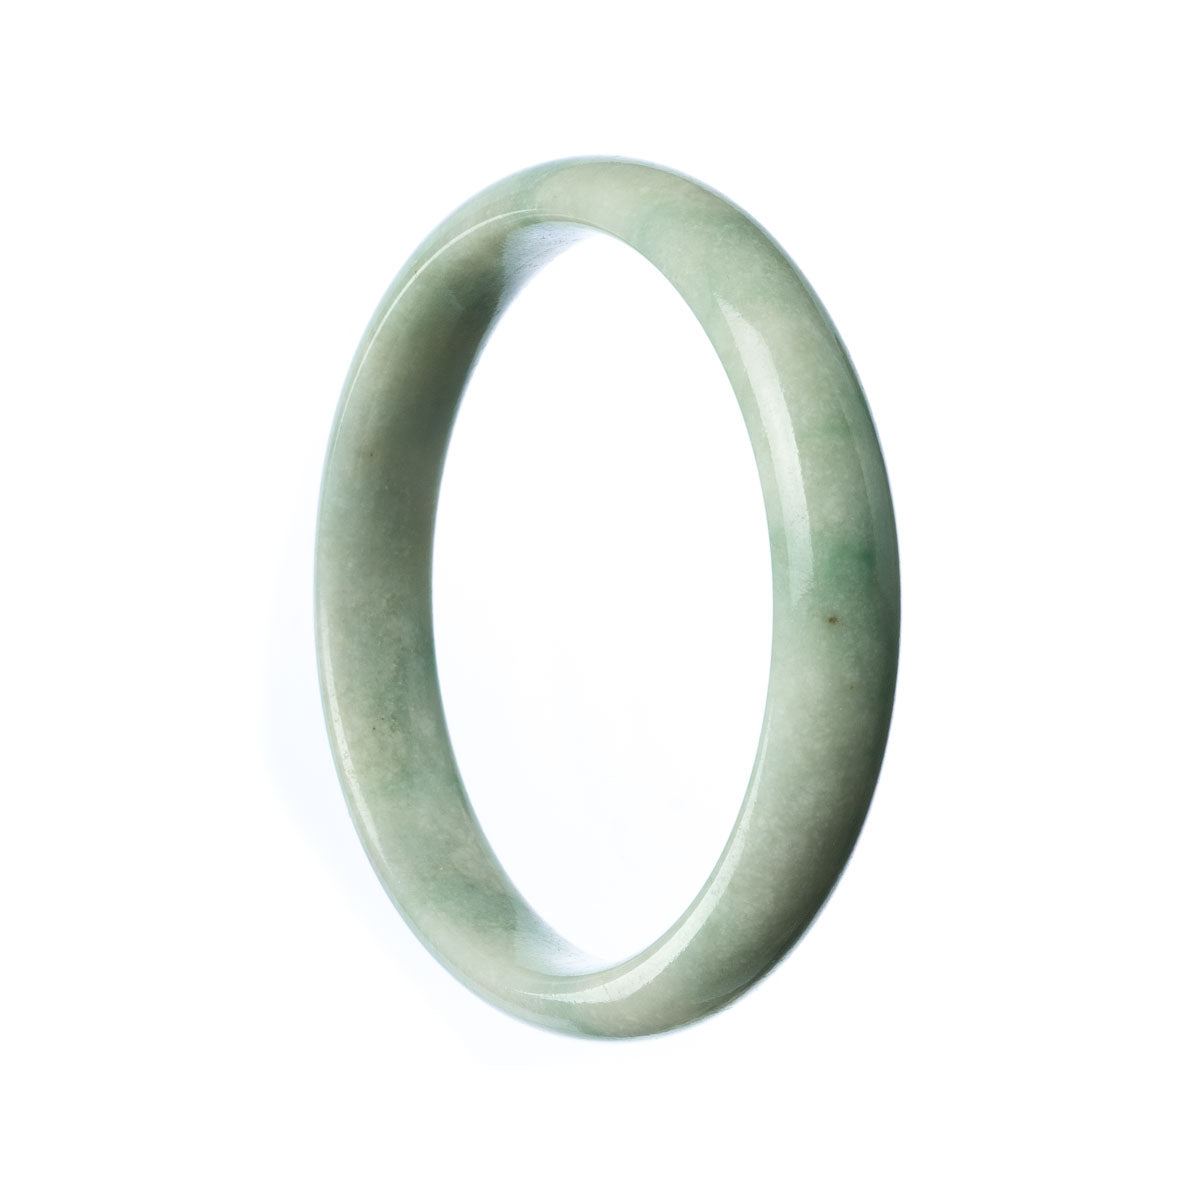 A close-up photo of a pale green jade bracelet in the shape of a half moon. The bracelet is made of genuine Grade A jade and measures 57mm in diameter. It is a beautiful piece of jewelry from the brand MAYS.